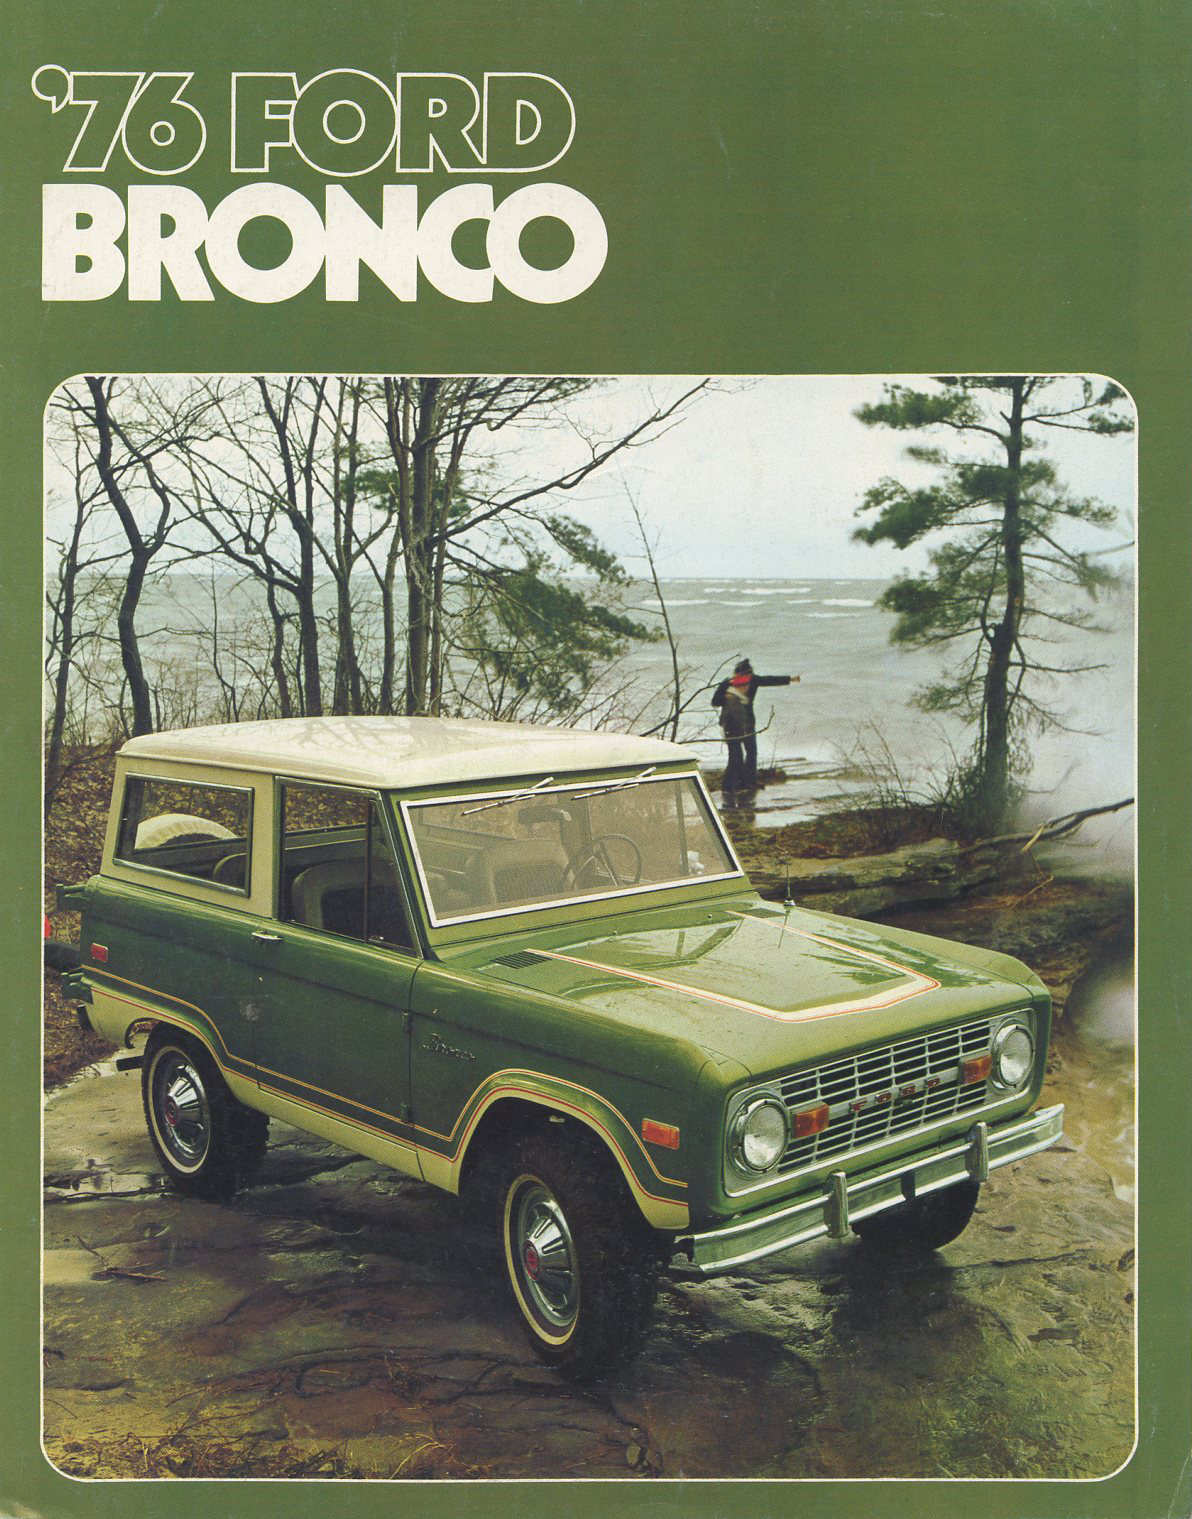 1976_Ford_Bronco_TriFold-01